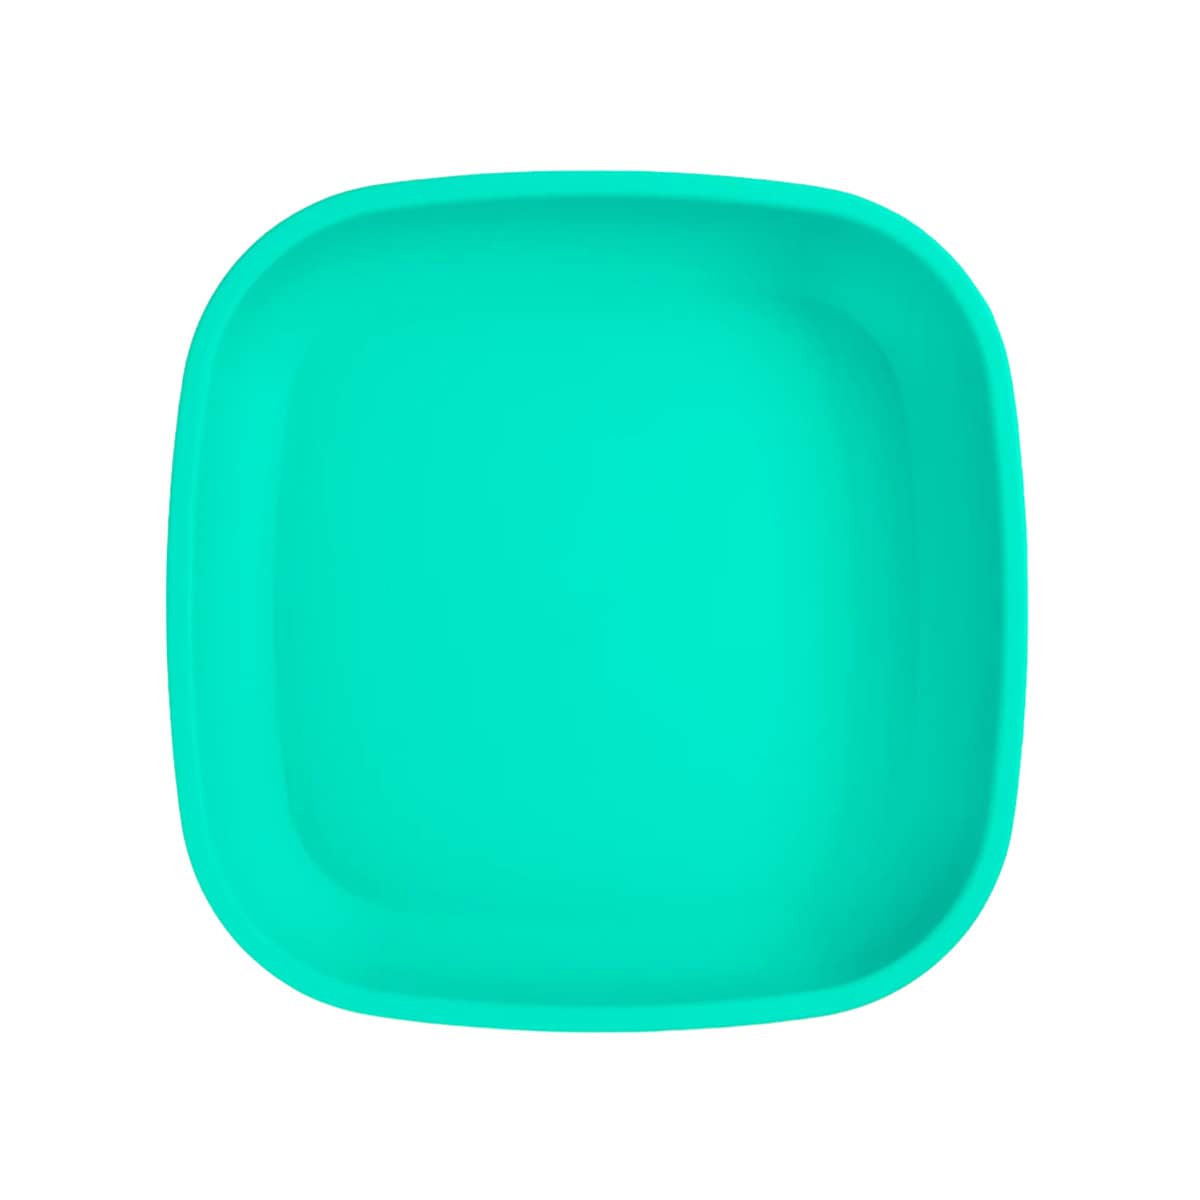 Re-Play Recycled Flat Plate - Aqua